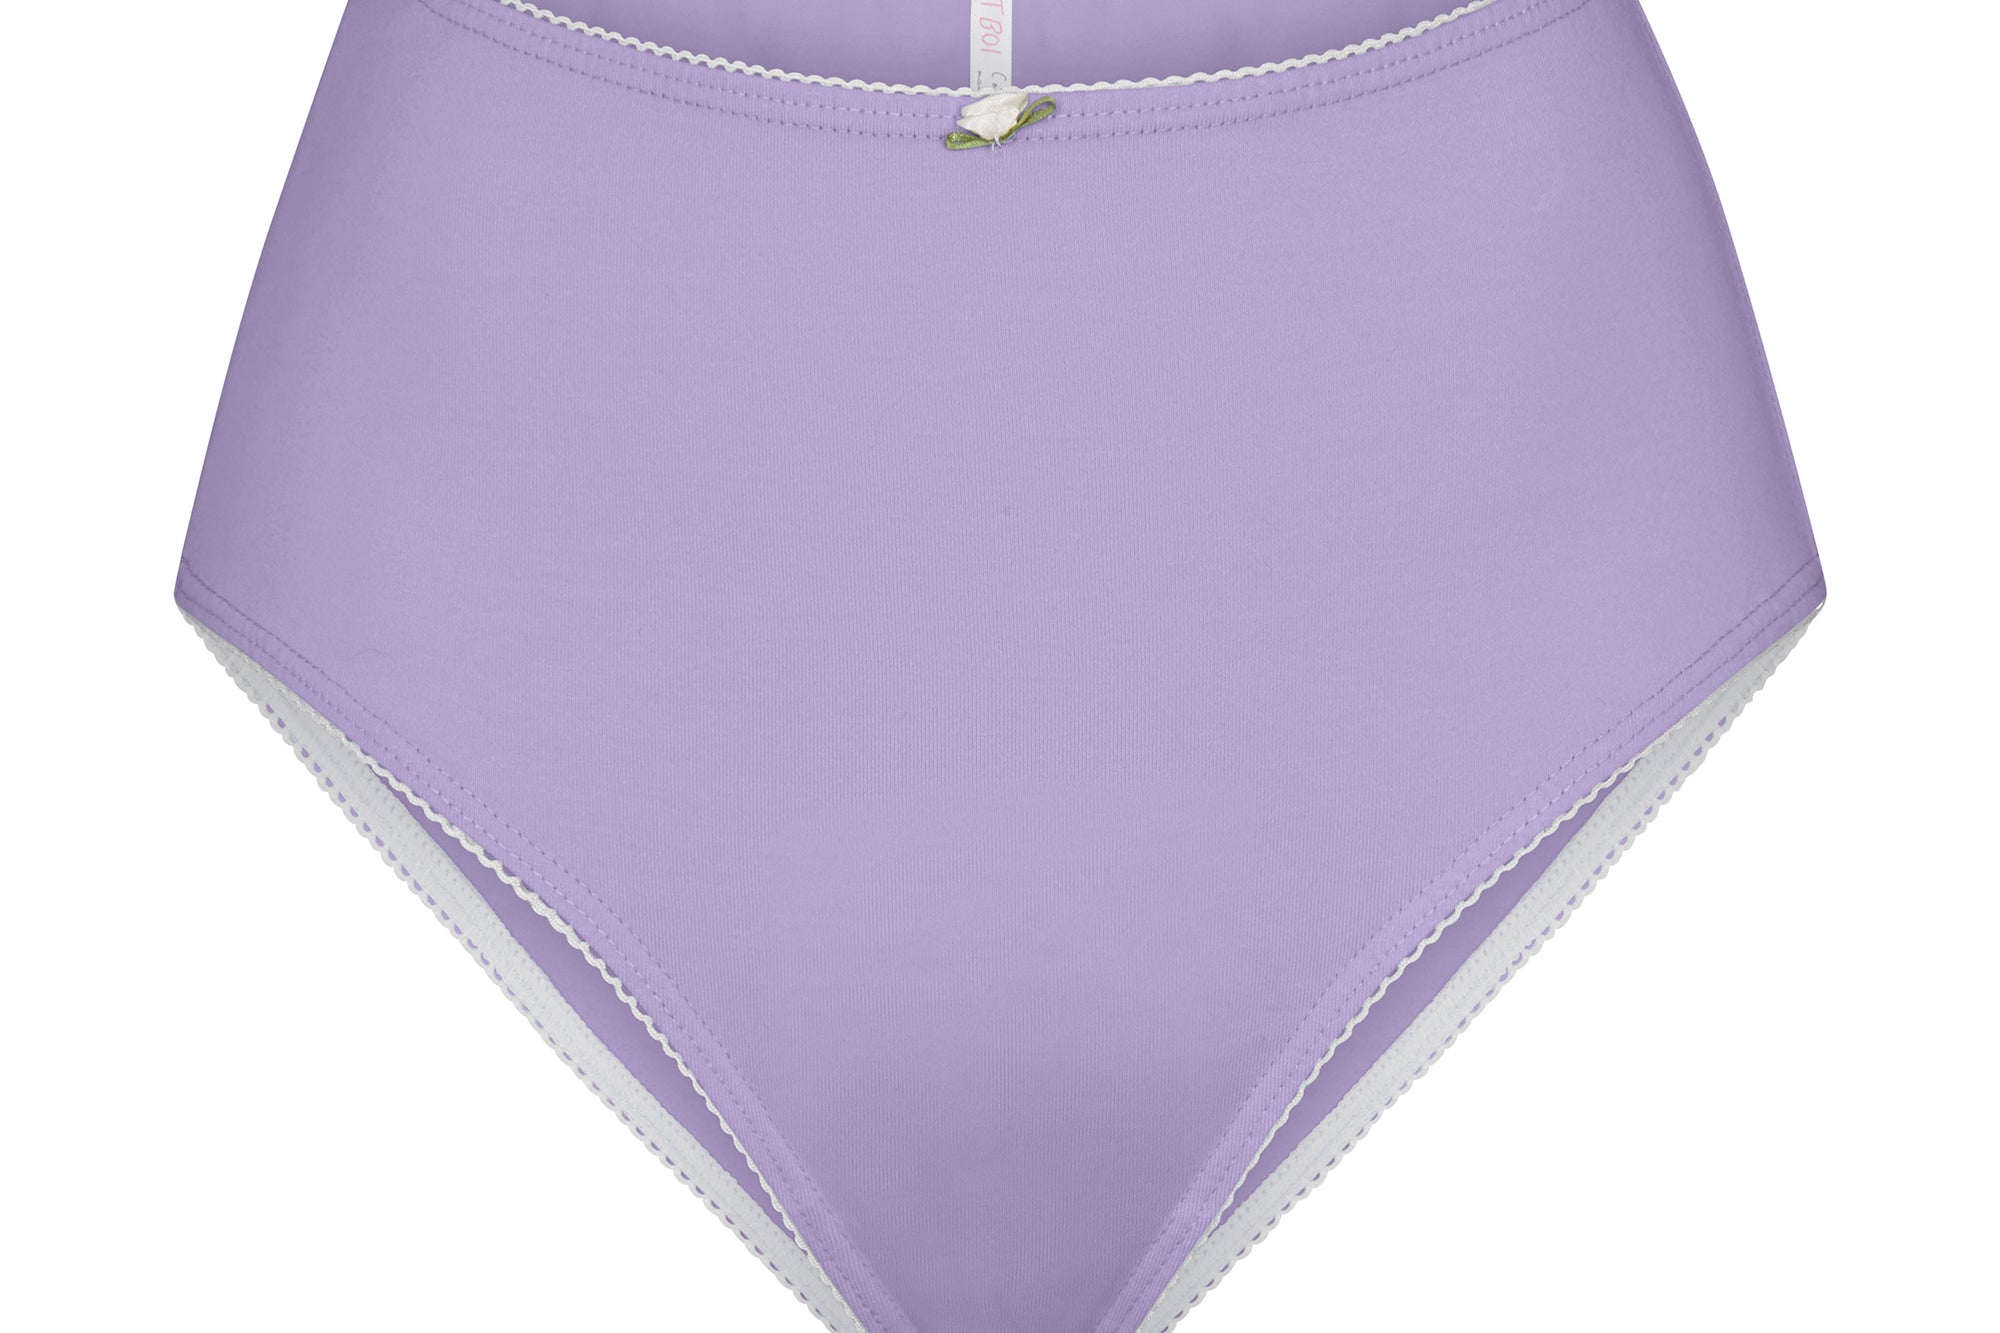 HIGH RISE UNDERWEAR IN ORCHID